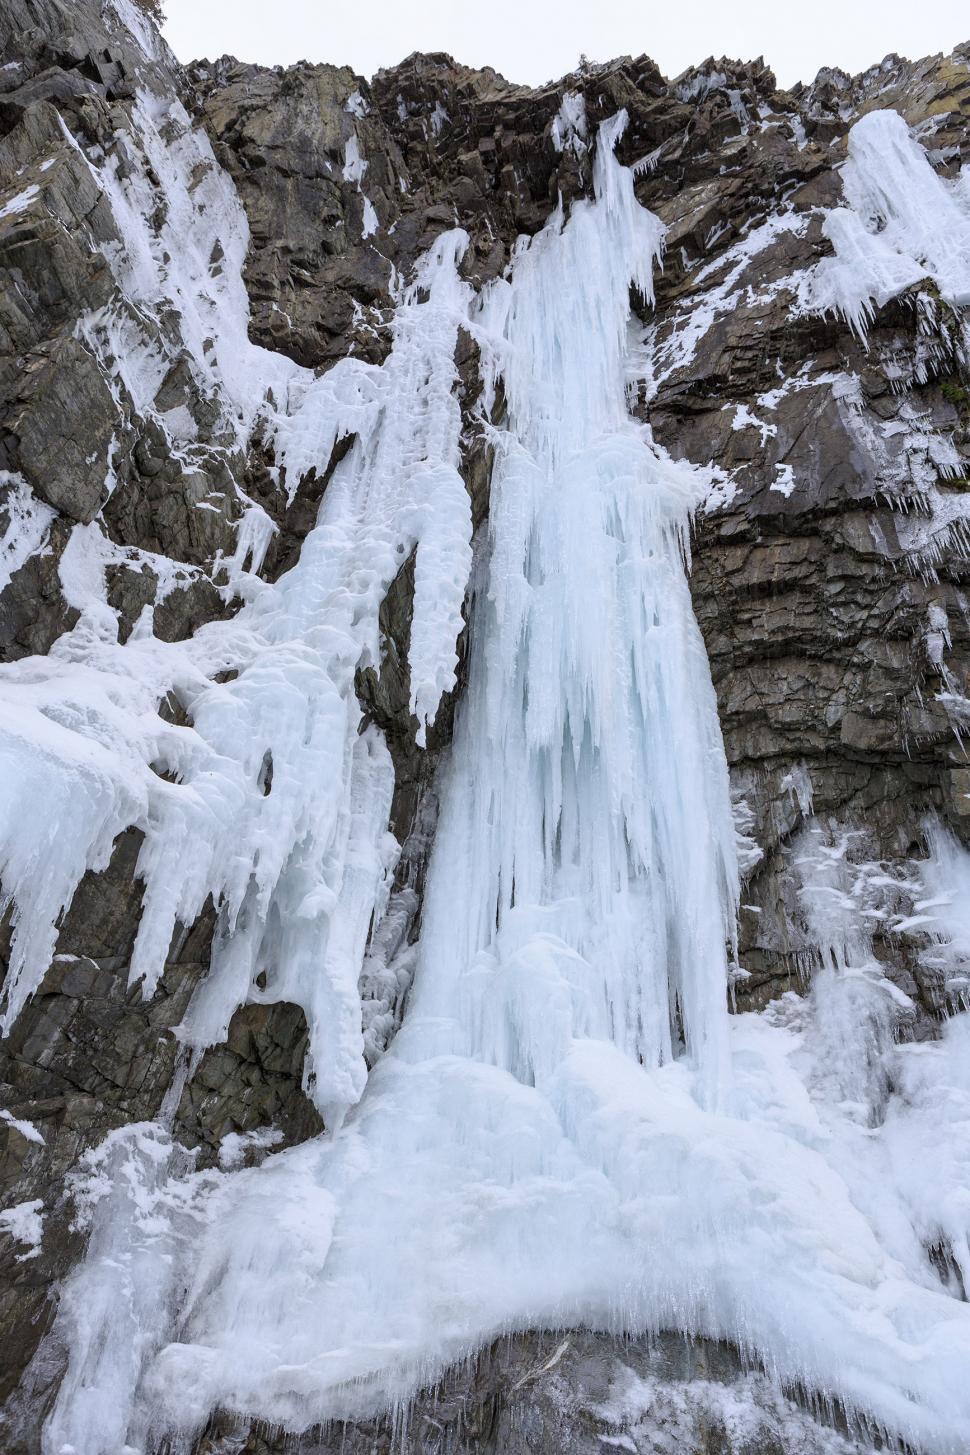 Free Image of Icicles on a wall of rock  